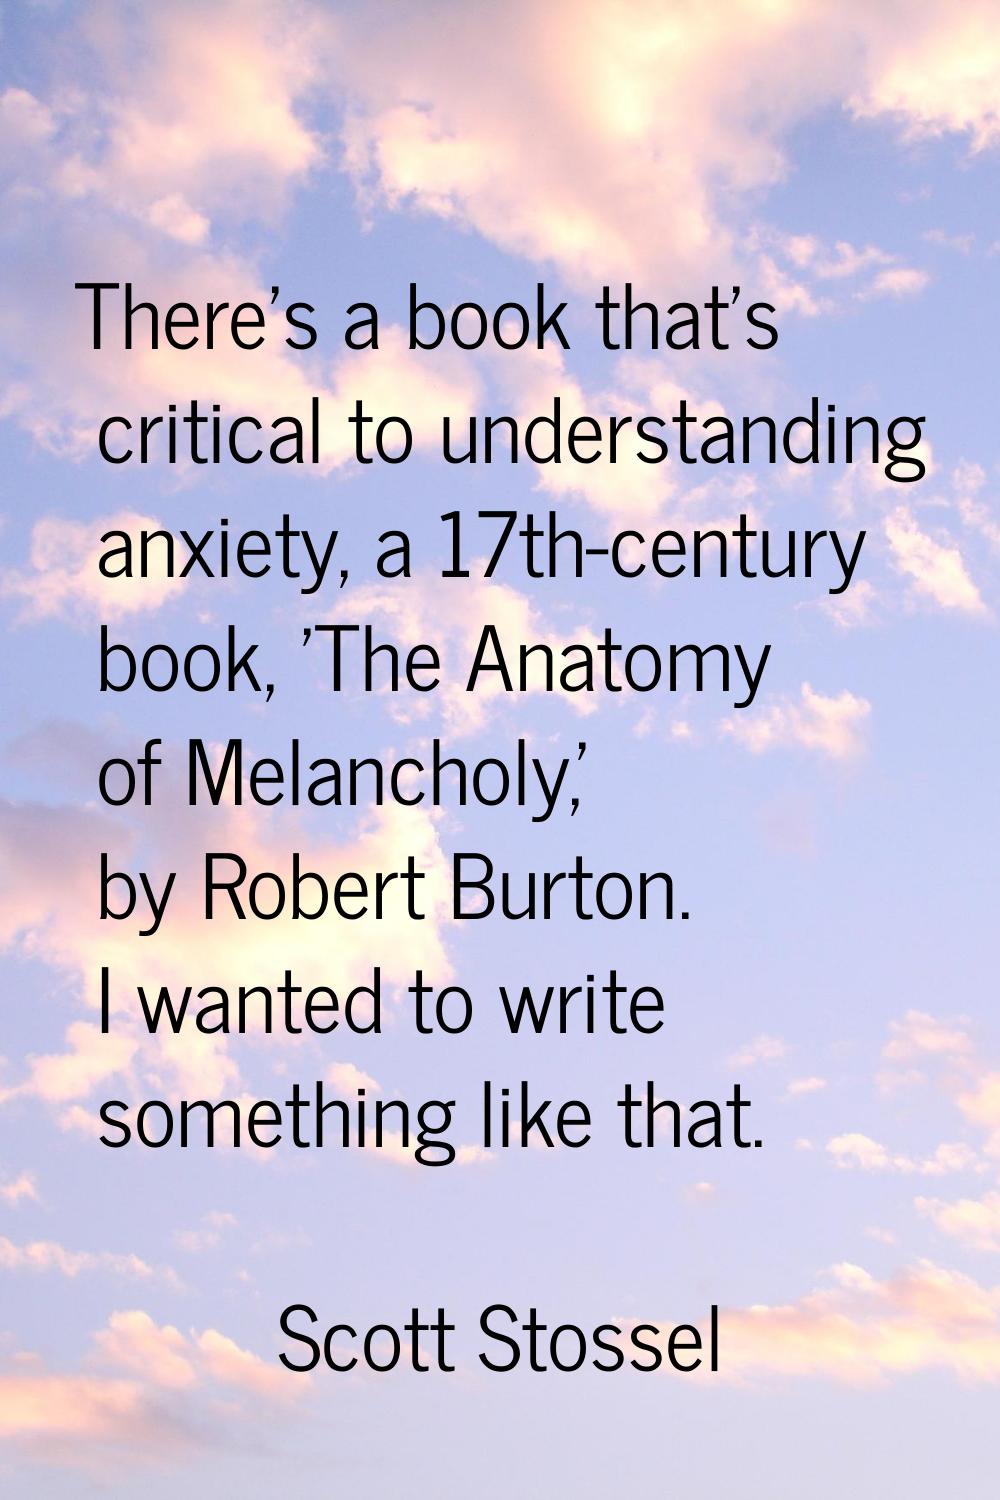 There's a book that's critical to understanding anxiety, a 17th-century book, 'The Anatomy of Melan